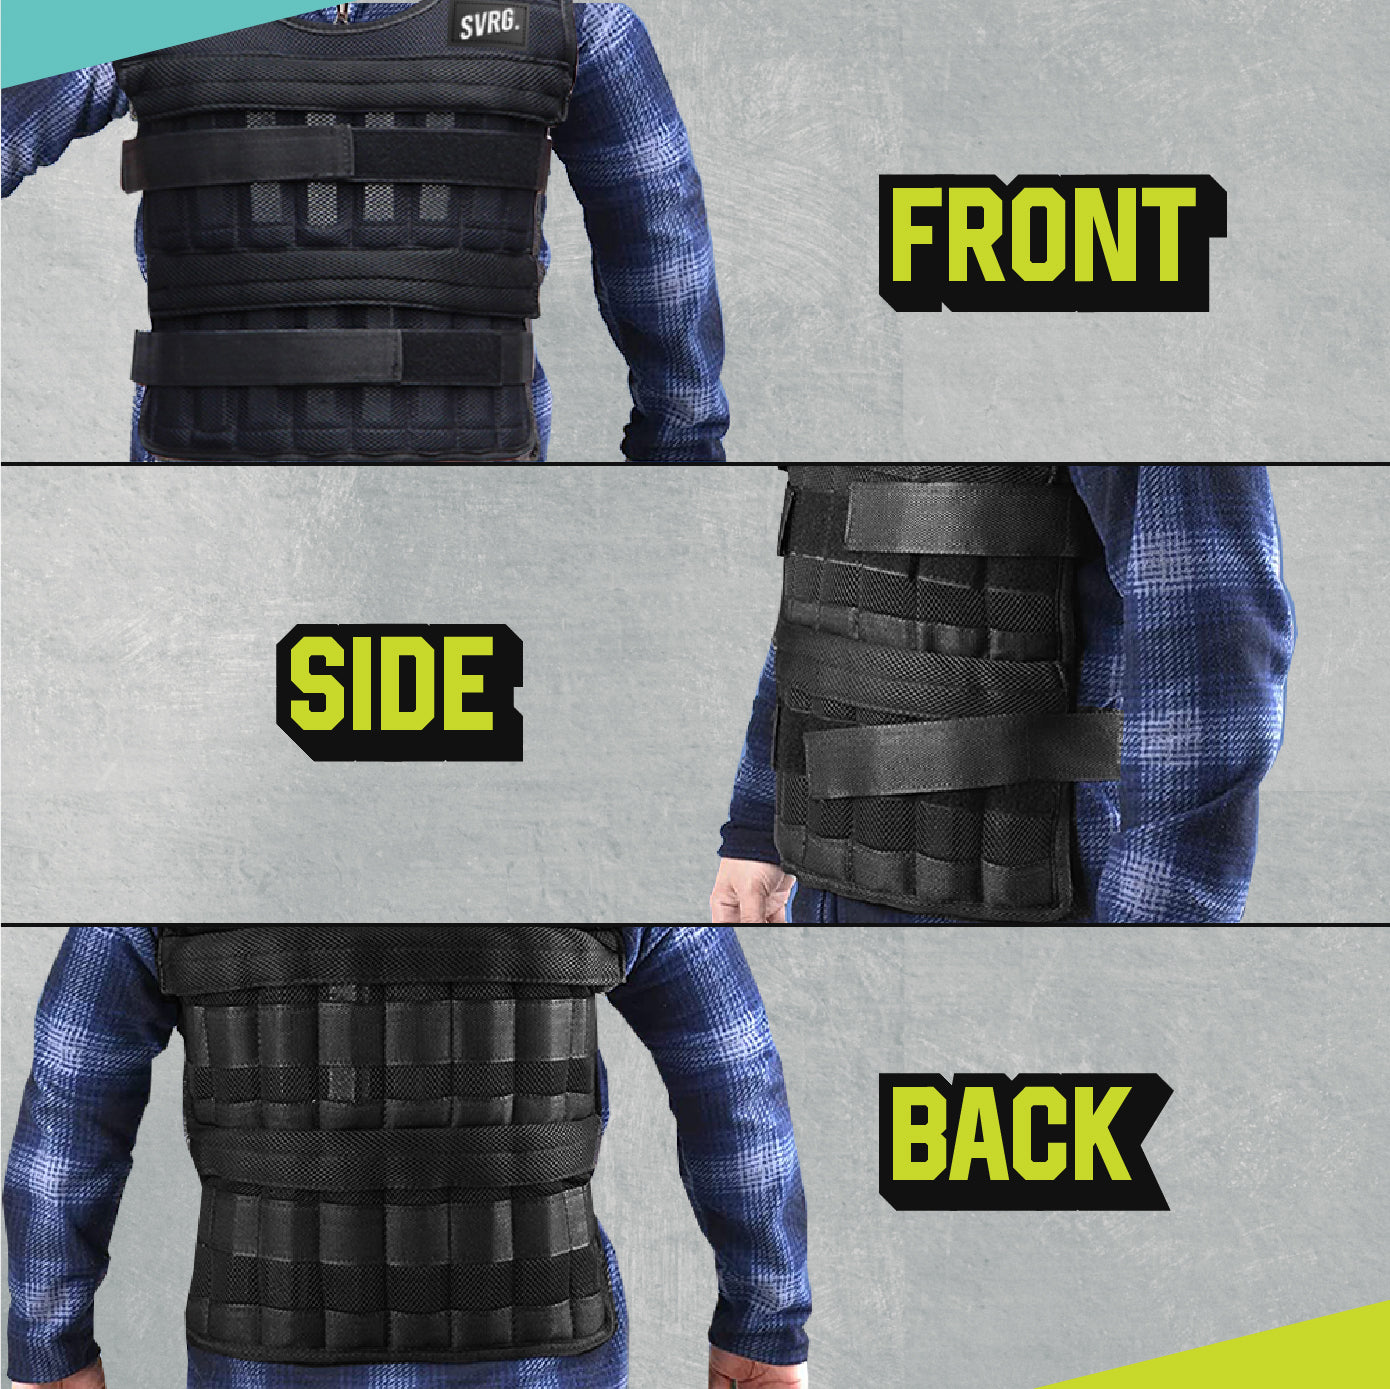 Adjustable Weighted Vest - Wrist &amp; Ankle Weight